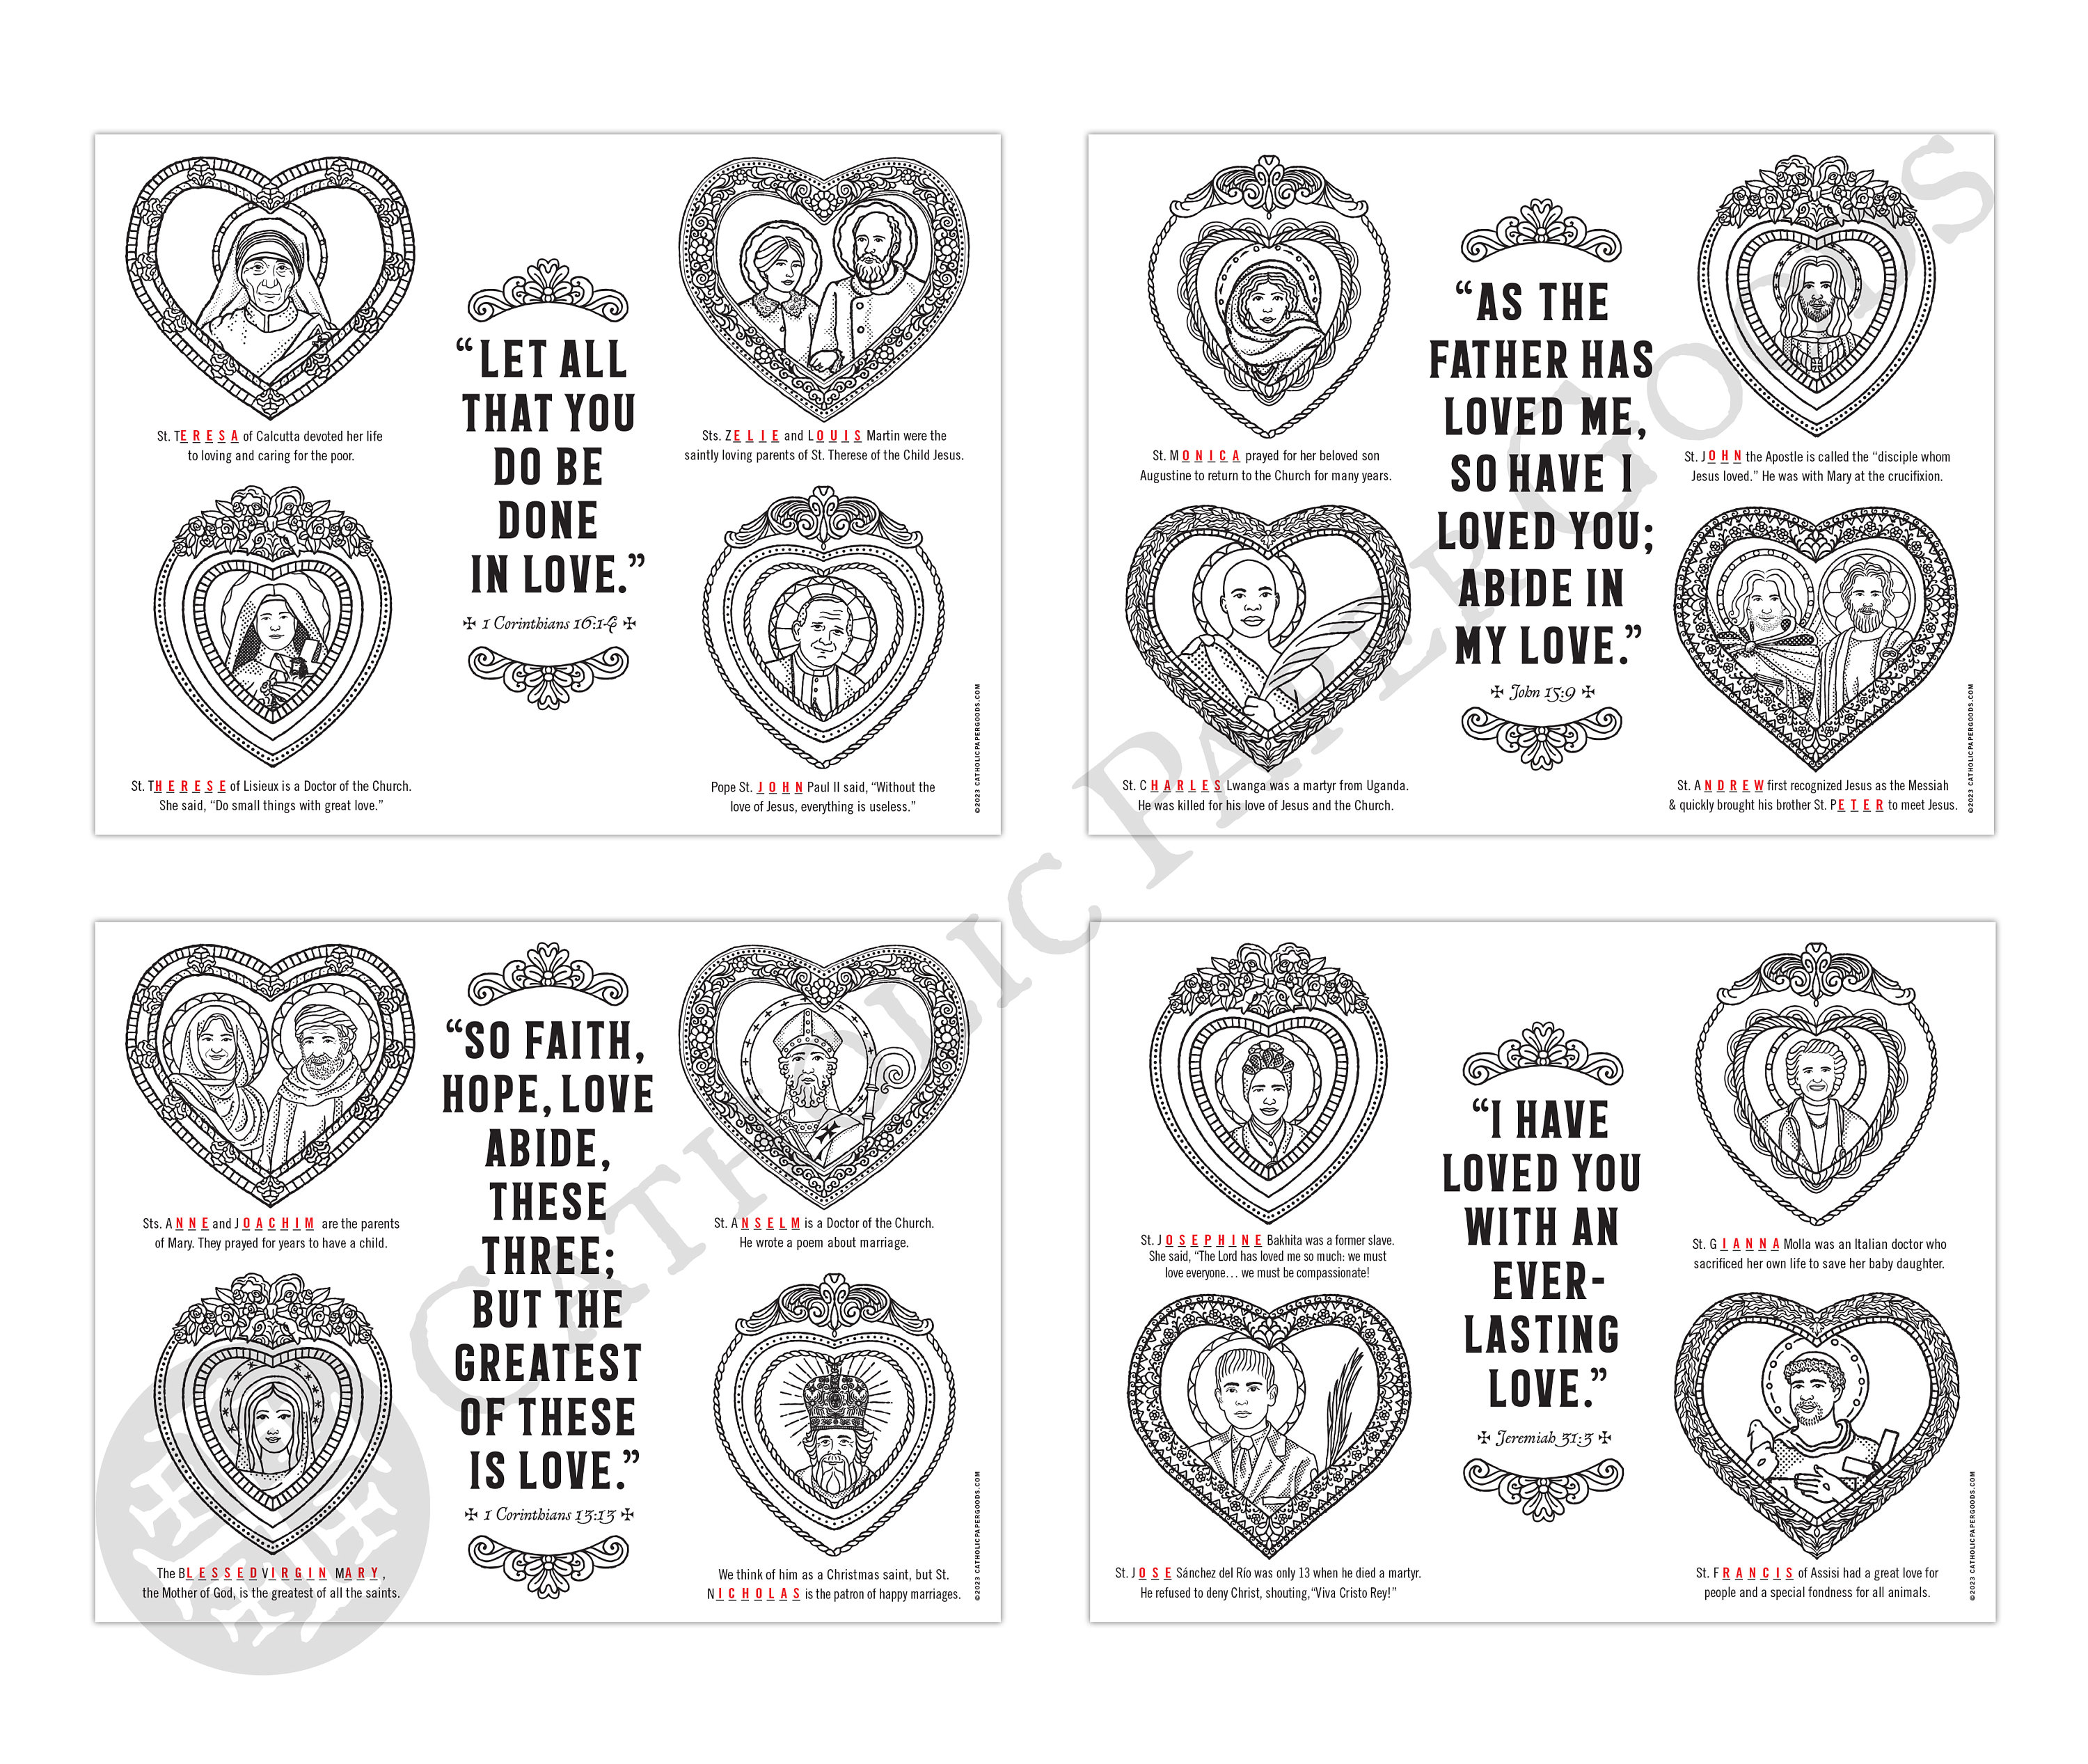 Valentine saints coloring pages and word game catholic saints printable coloring pages valentines day activity saint quiz answer key